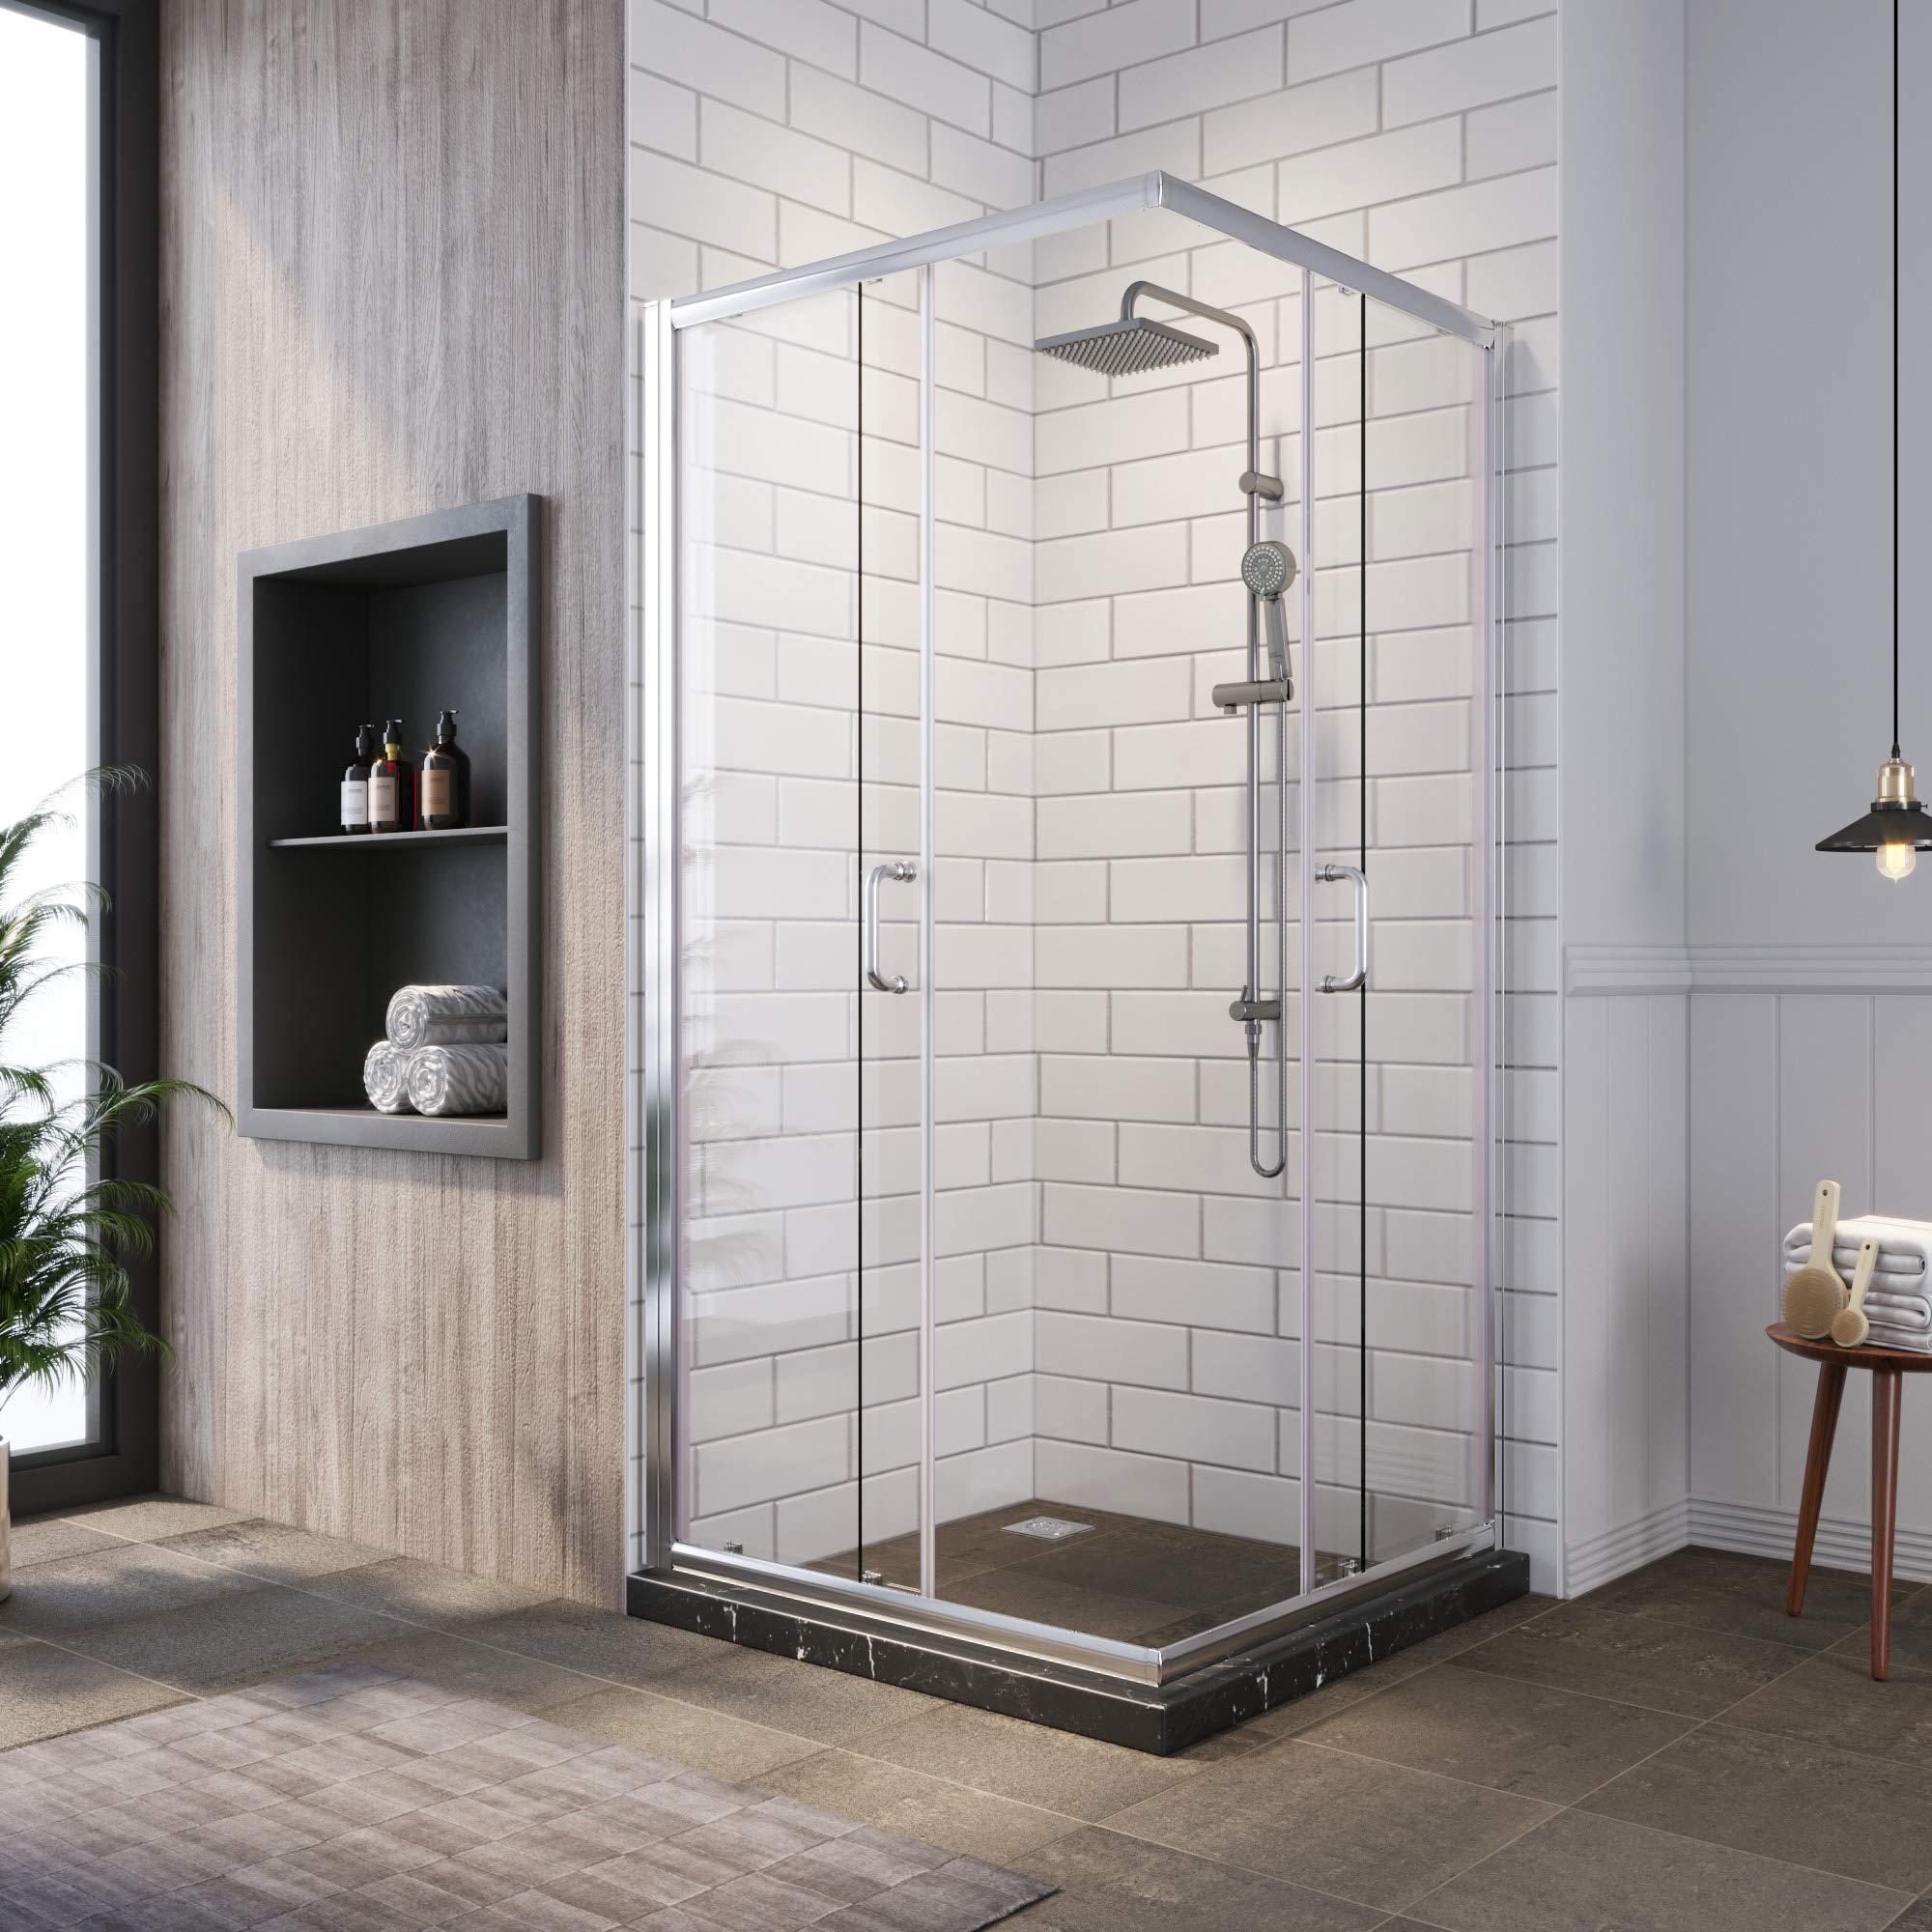 SUNNY SHOWER 34 in. L x 34 in. W x 72 in. H Chrome Finish Corner Entry Enclosure With Sliding Doors